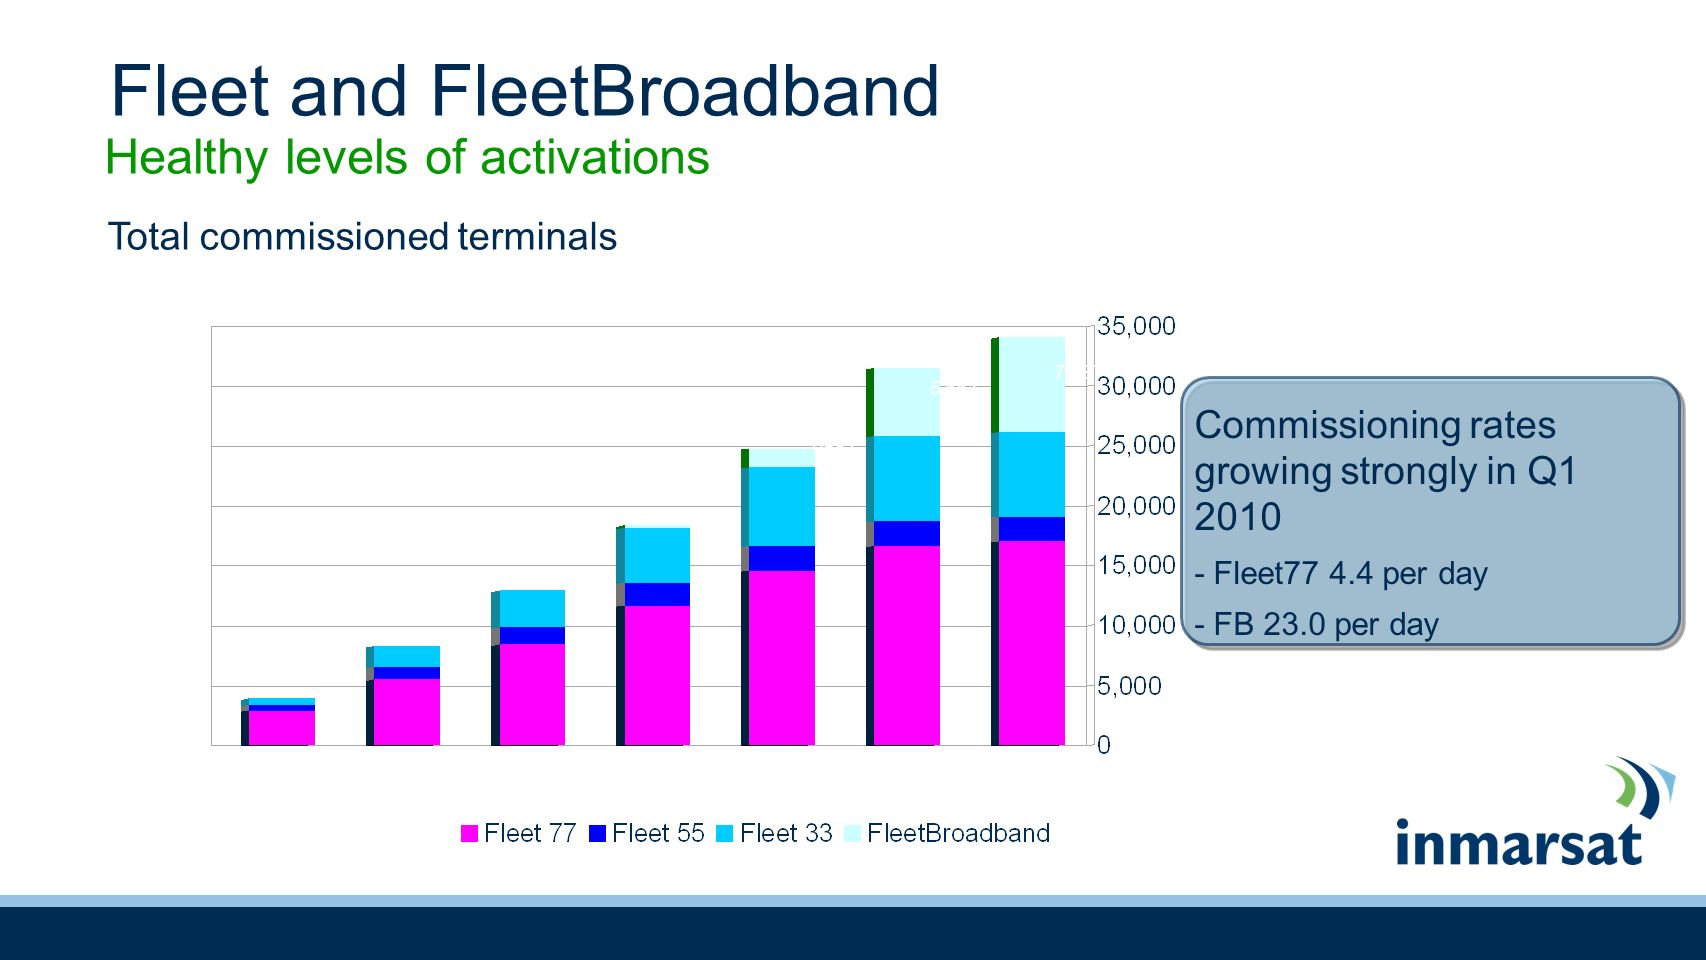 Fleet and FleetBroadband Healthy levels of activations Total commissioned terminals Commissioning rates growing strongly in Q Fleet per day - FB 23.0 per day 1,770 1,591 5,667 7,887